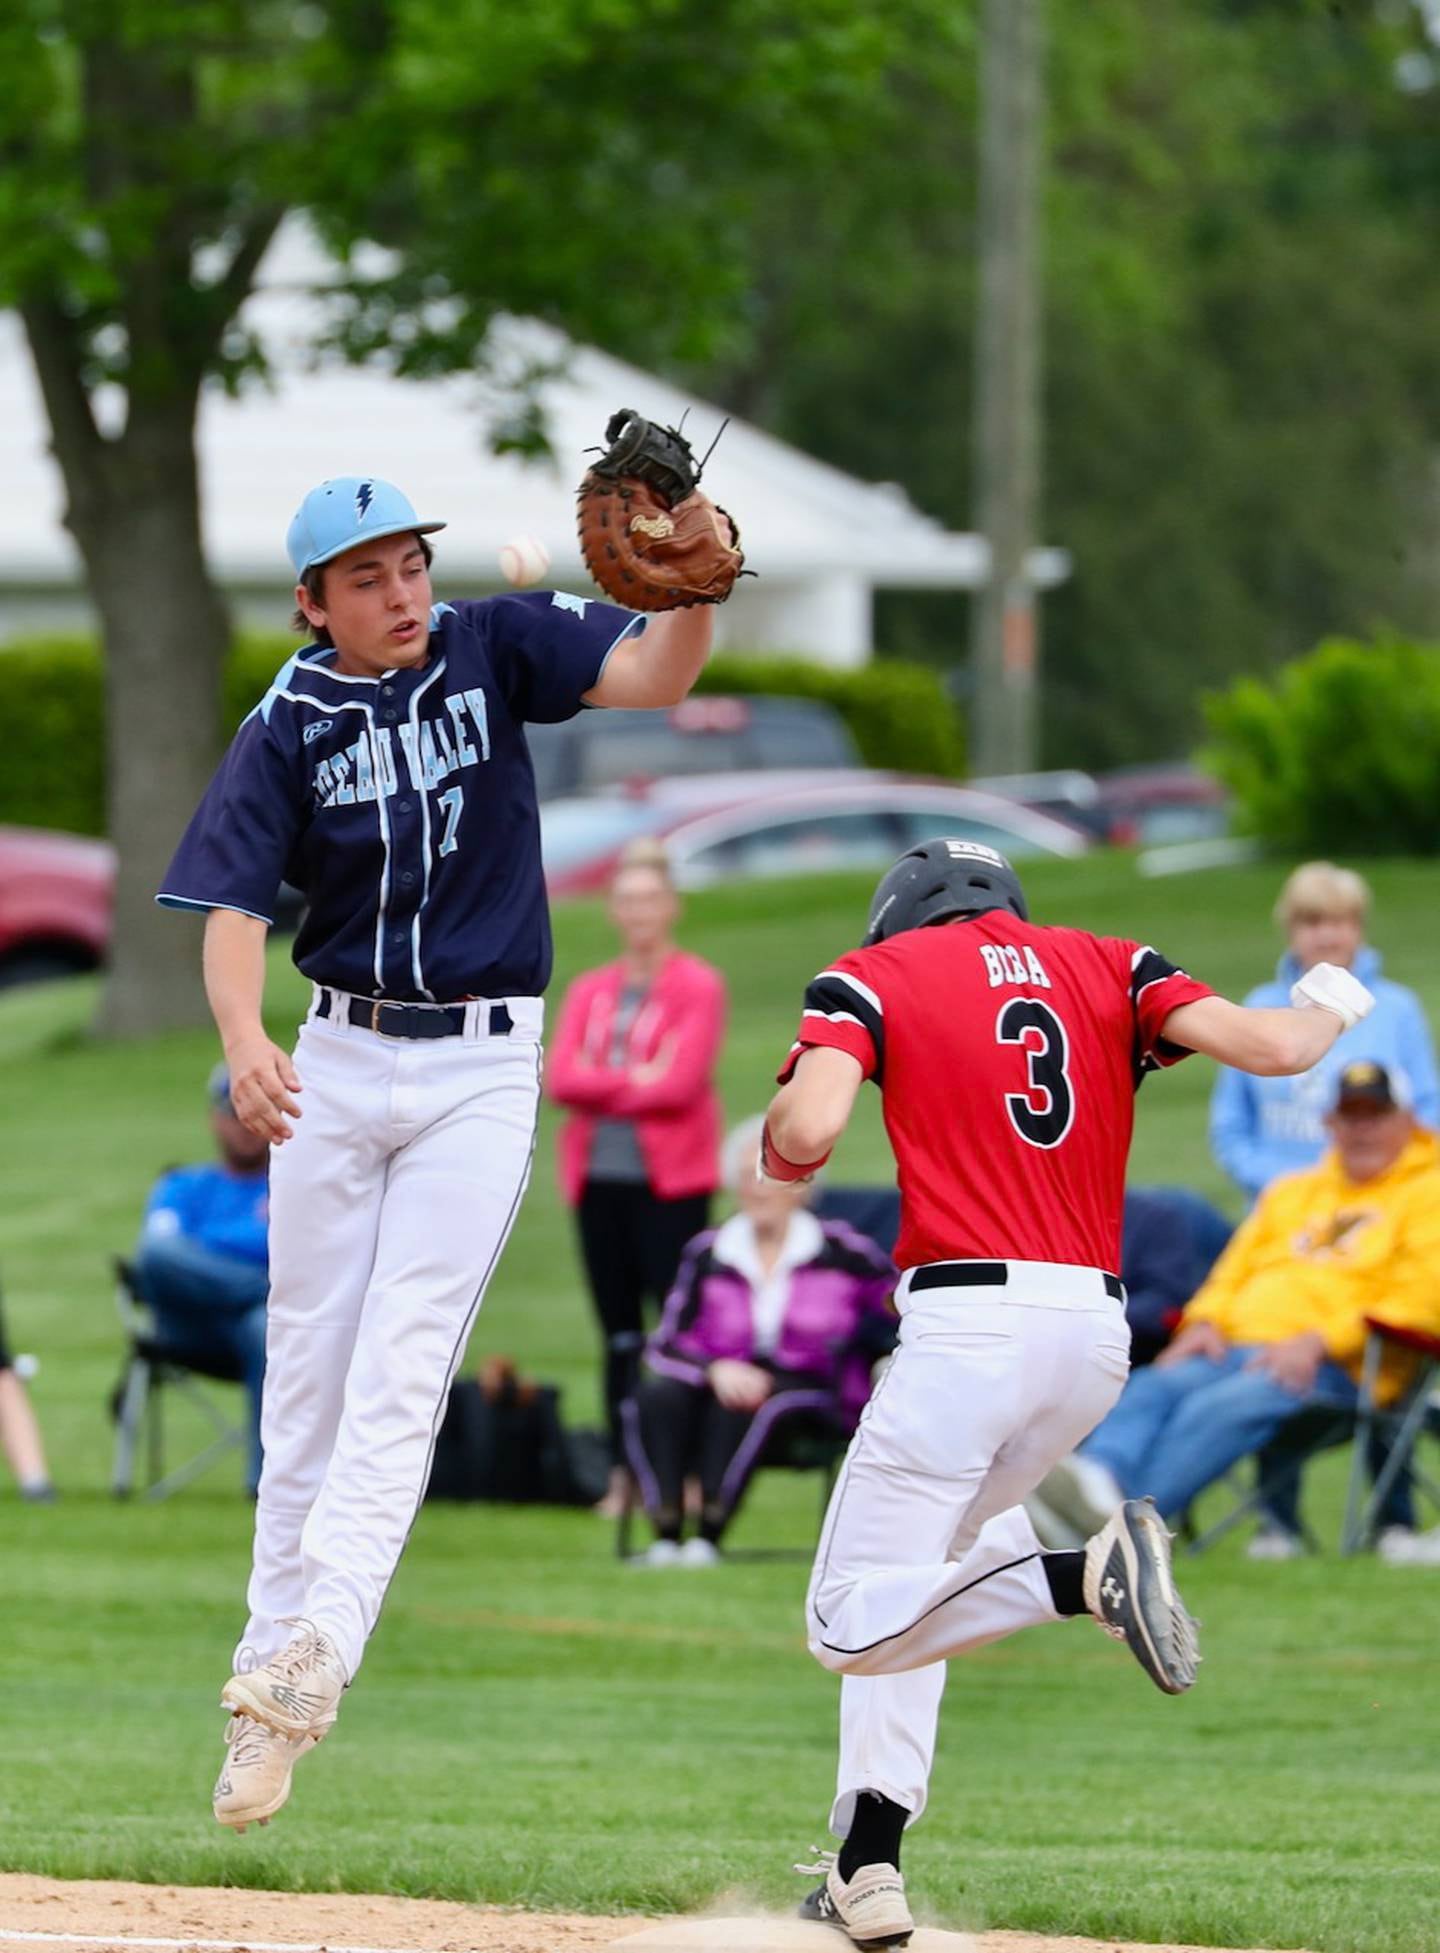 Bureau Valley first baseman Bryson Smith can't find the handle as E-P's Mikey Biba reaches safely Monday at Princeton.